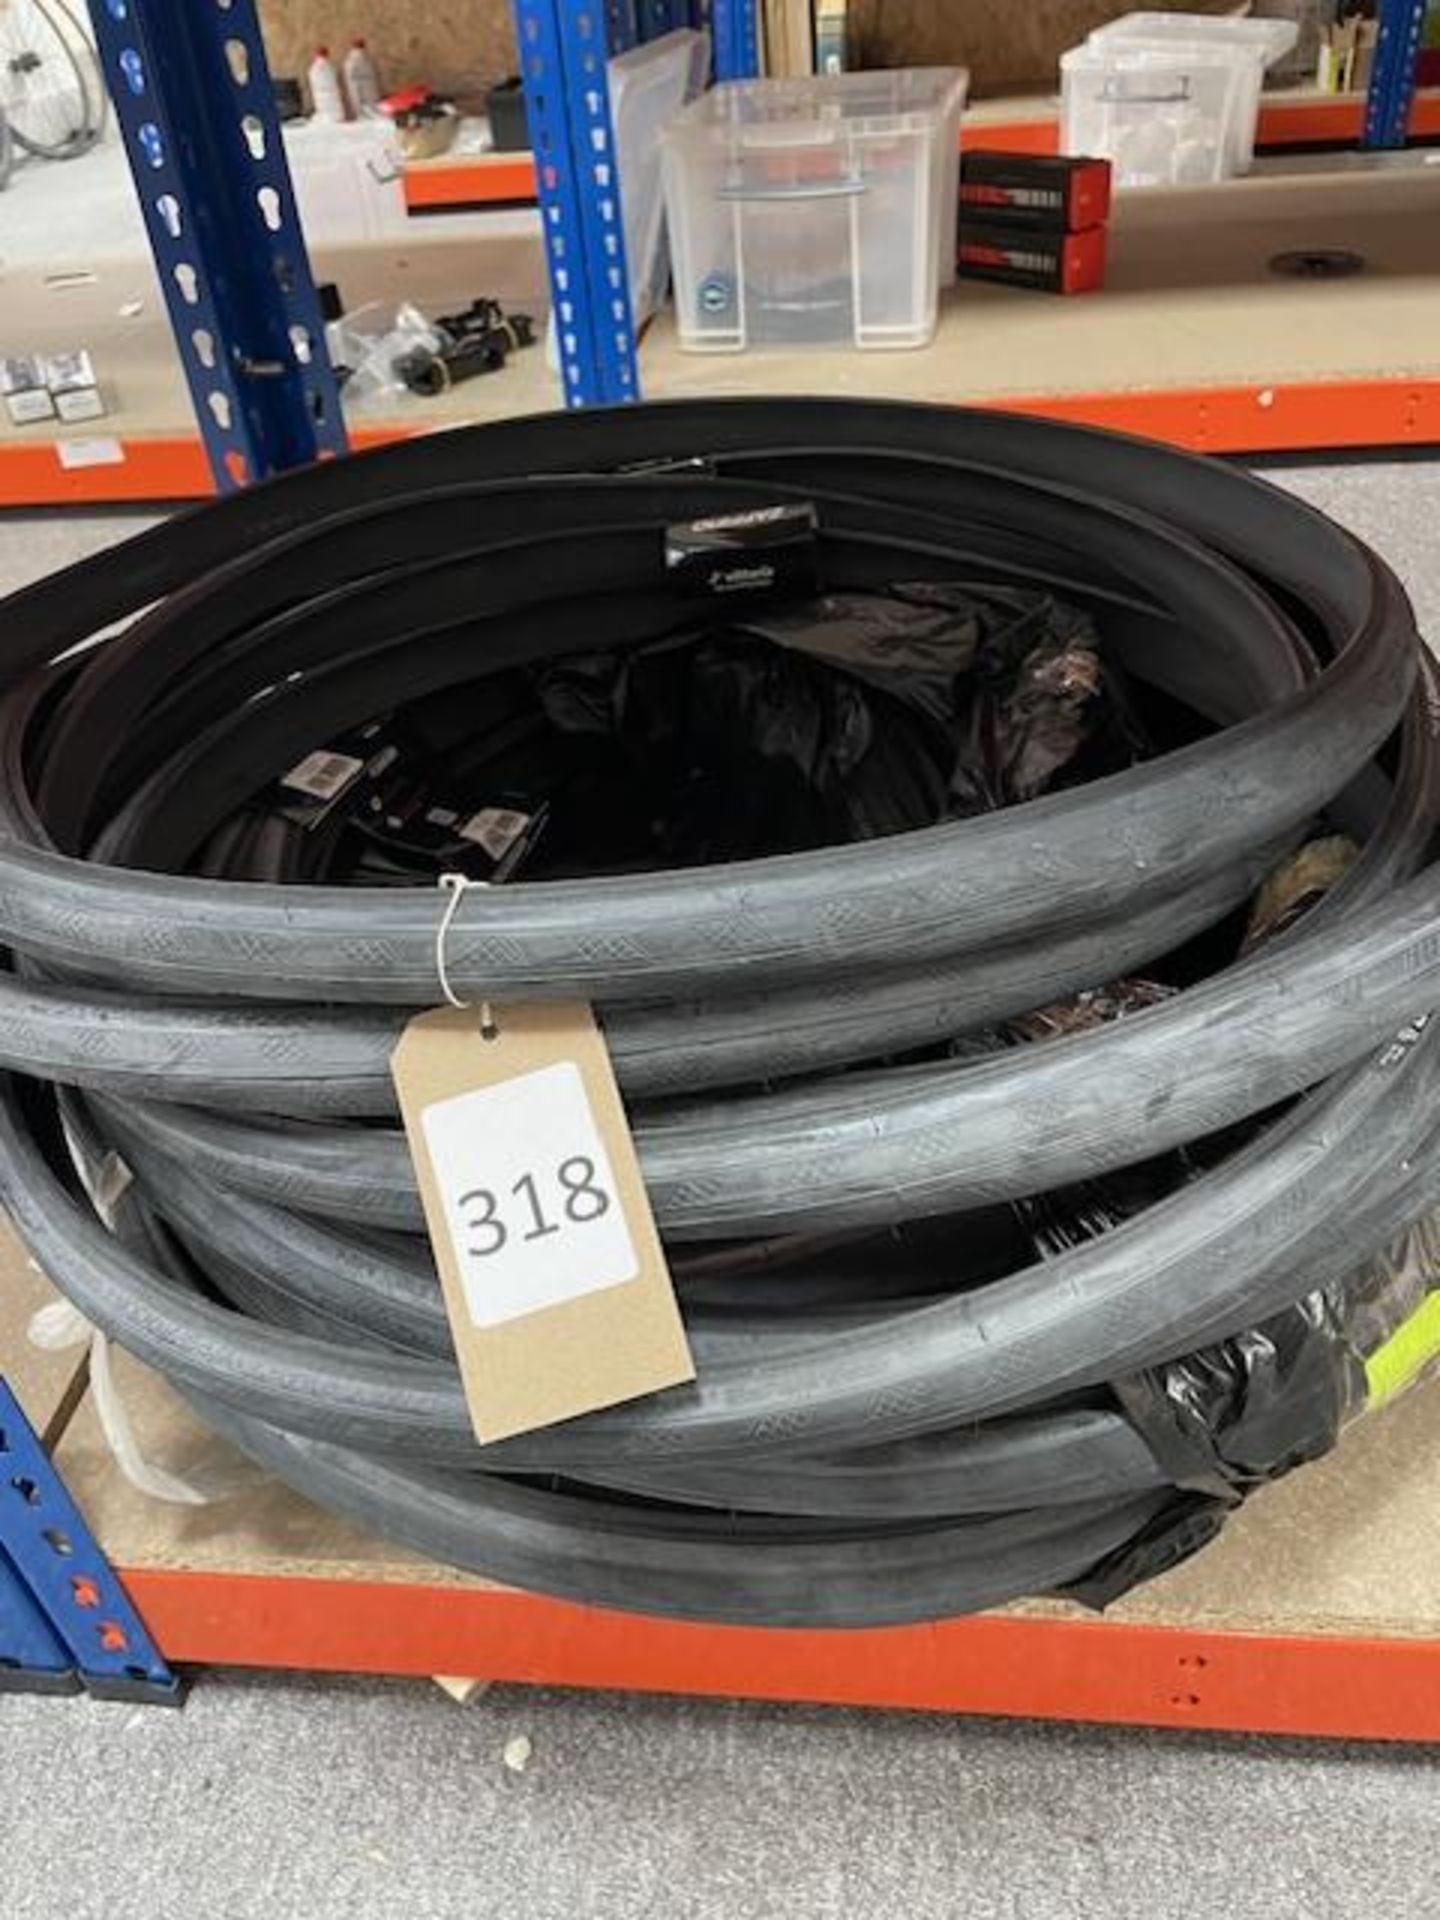 22 Pairs Zaffiro 25mm & 28mm Tyres, 700c (Location: Newport Pagnell. Please Refer to General Notes)